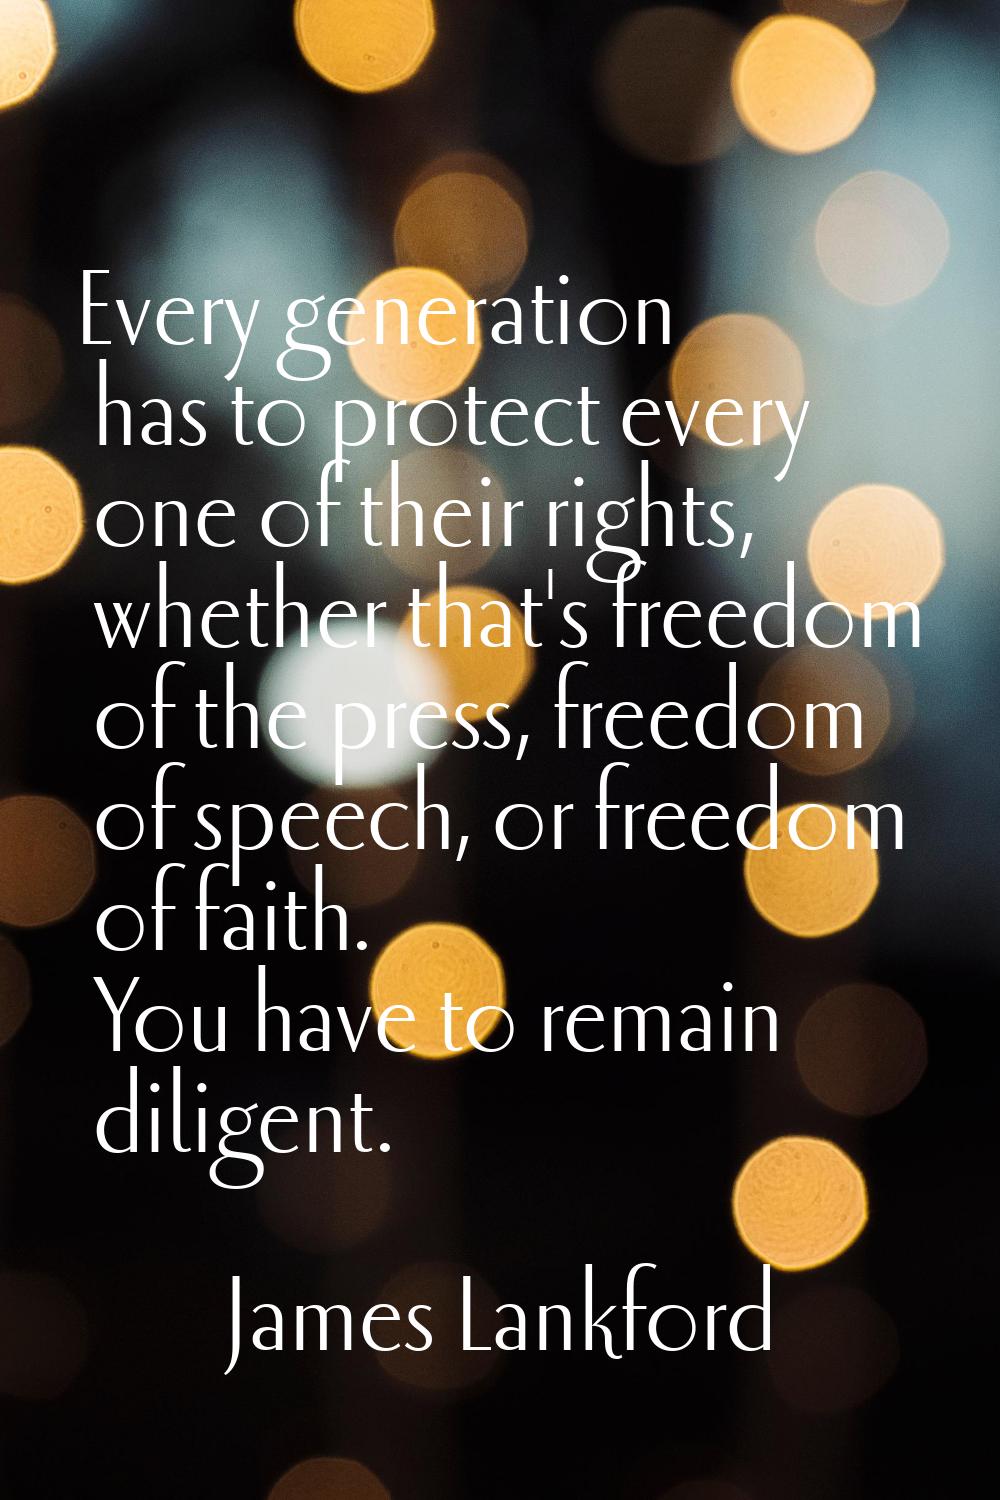 Every generation has to protect every one of their rights, whether that's freedom of the press, fre